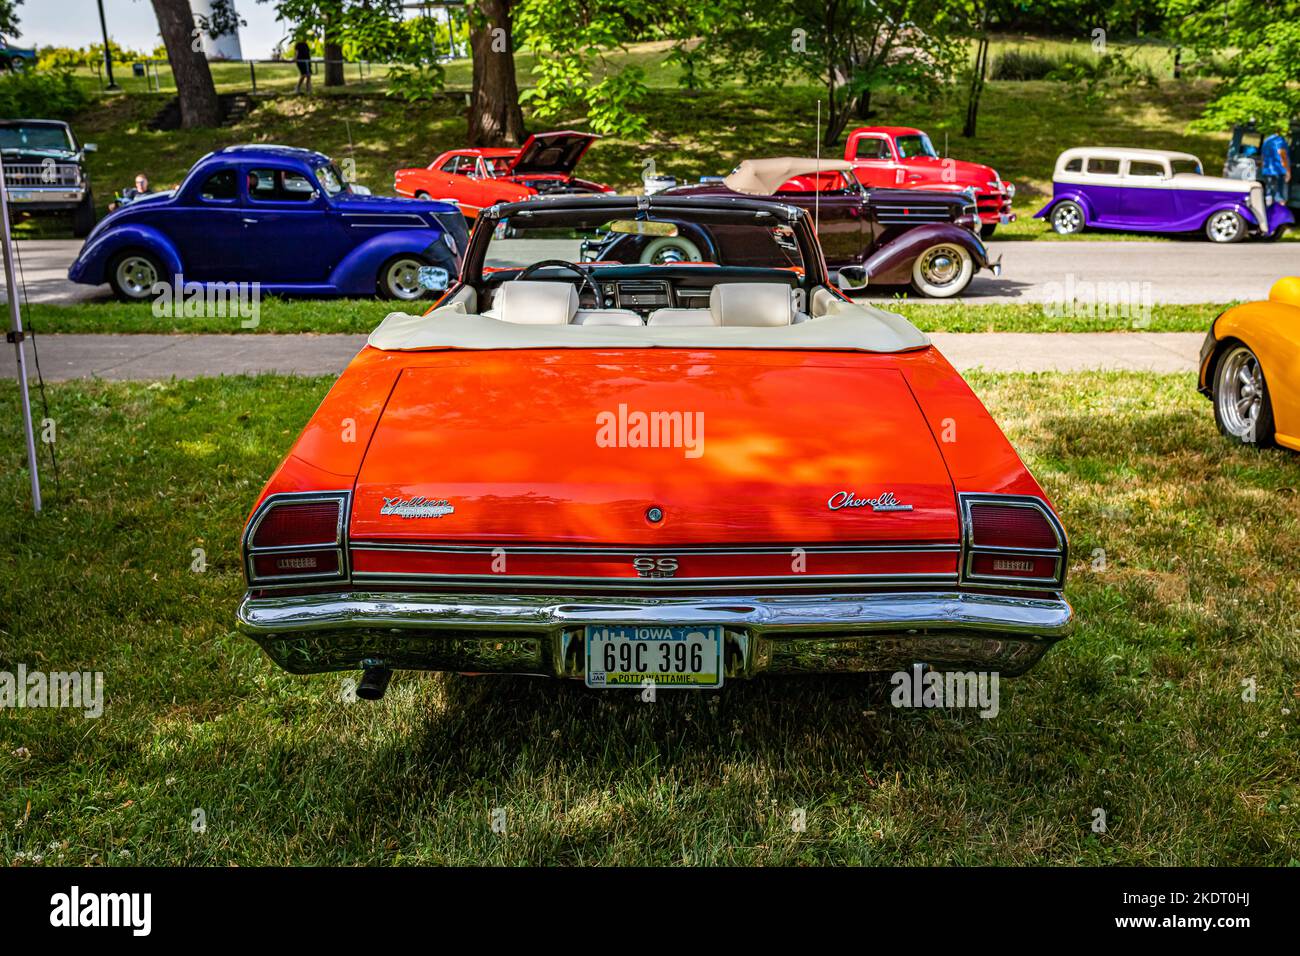 Des Moines, IA - July 02, 2022: High perspective rear view of a 1969 Chevrolet Chevelle SS Convertible at a local car show. Stock Photo